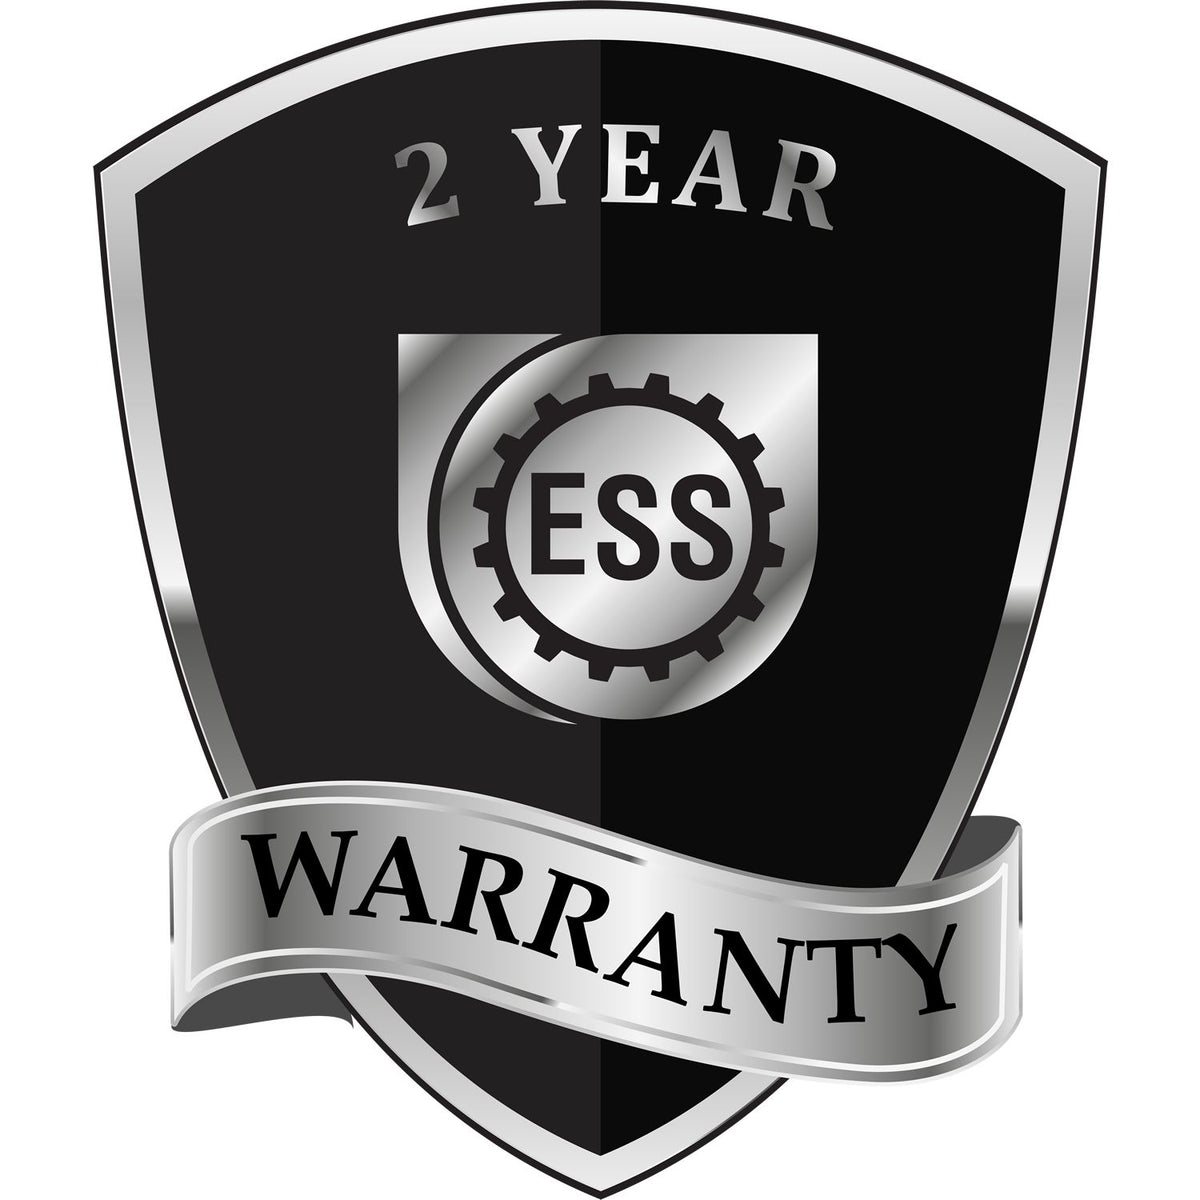 A badge or emblem showing a warranty icon for the Extended Long Reach Massachusetts Surveyor Embosser